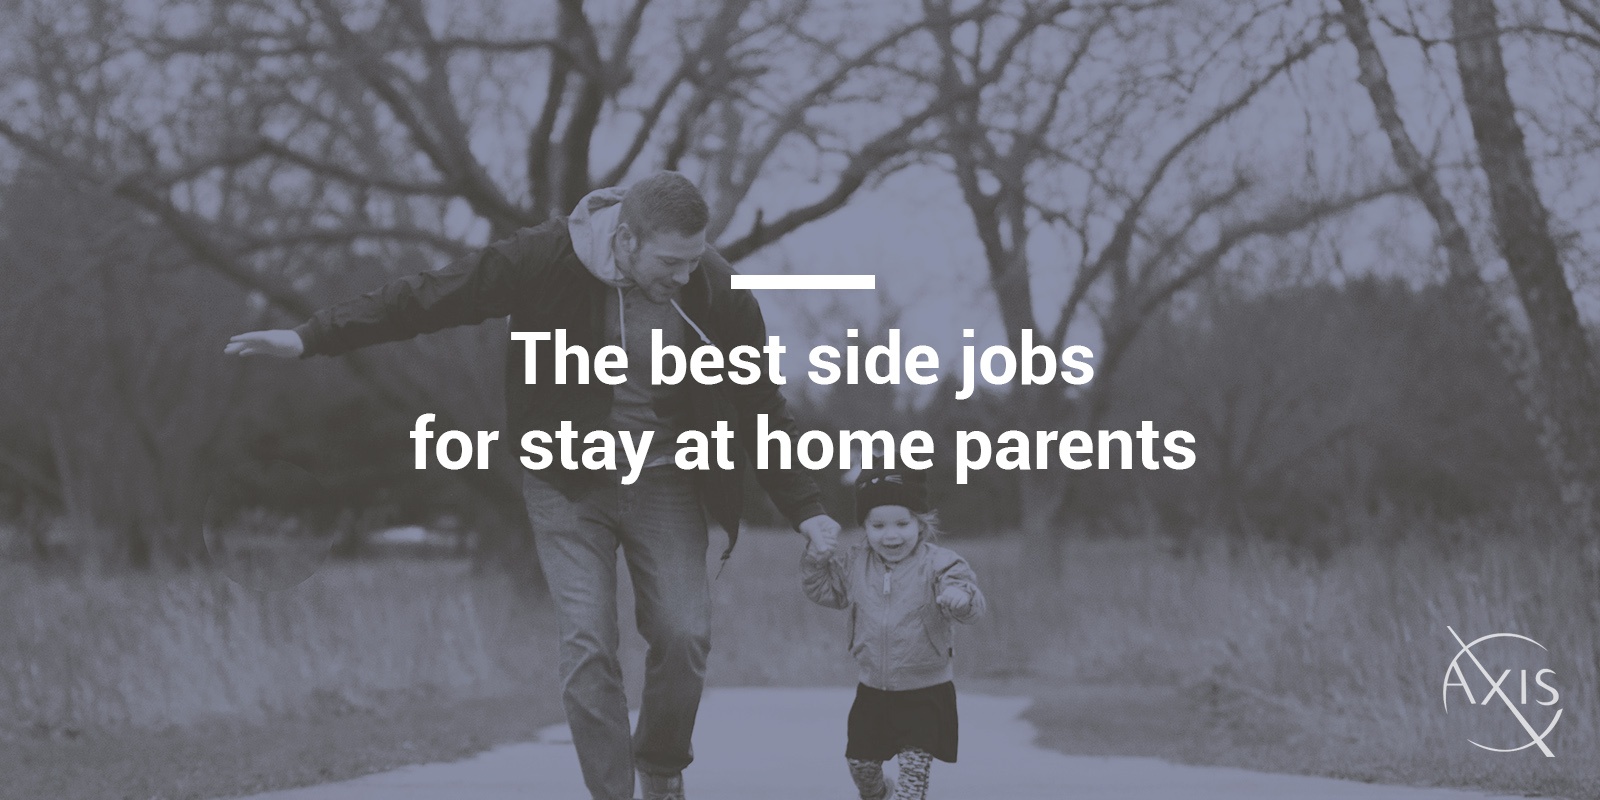 The best side jobs for stay at home parents